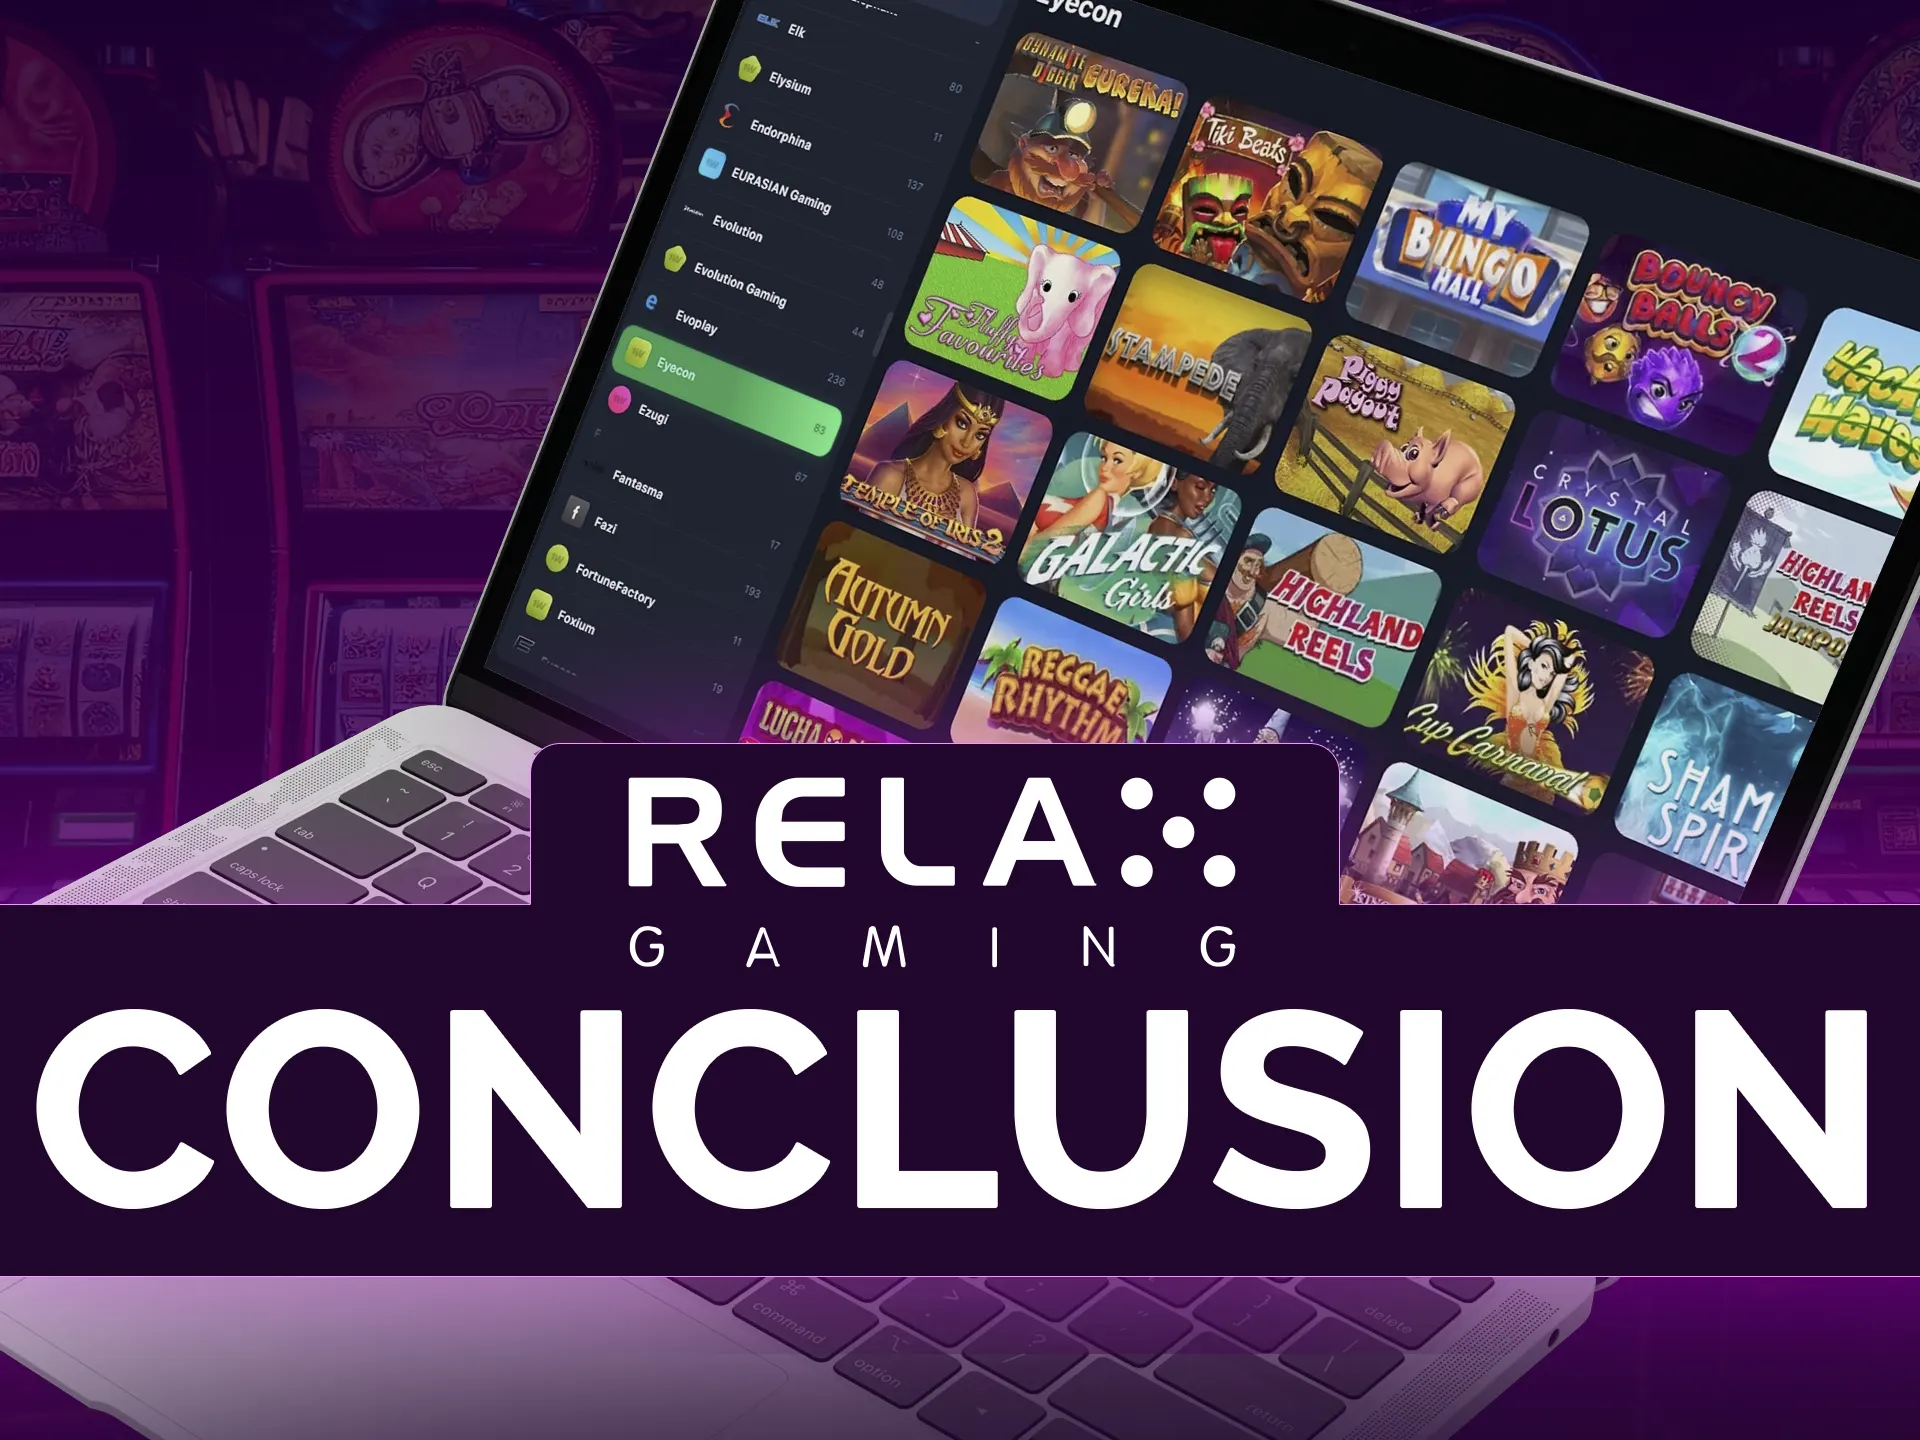 Conlusion: Relax Gaming it`s a high ratings, quality games, unique plots.